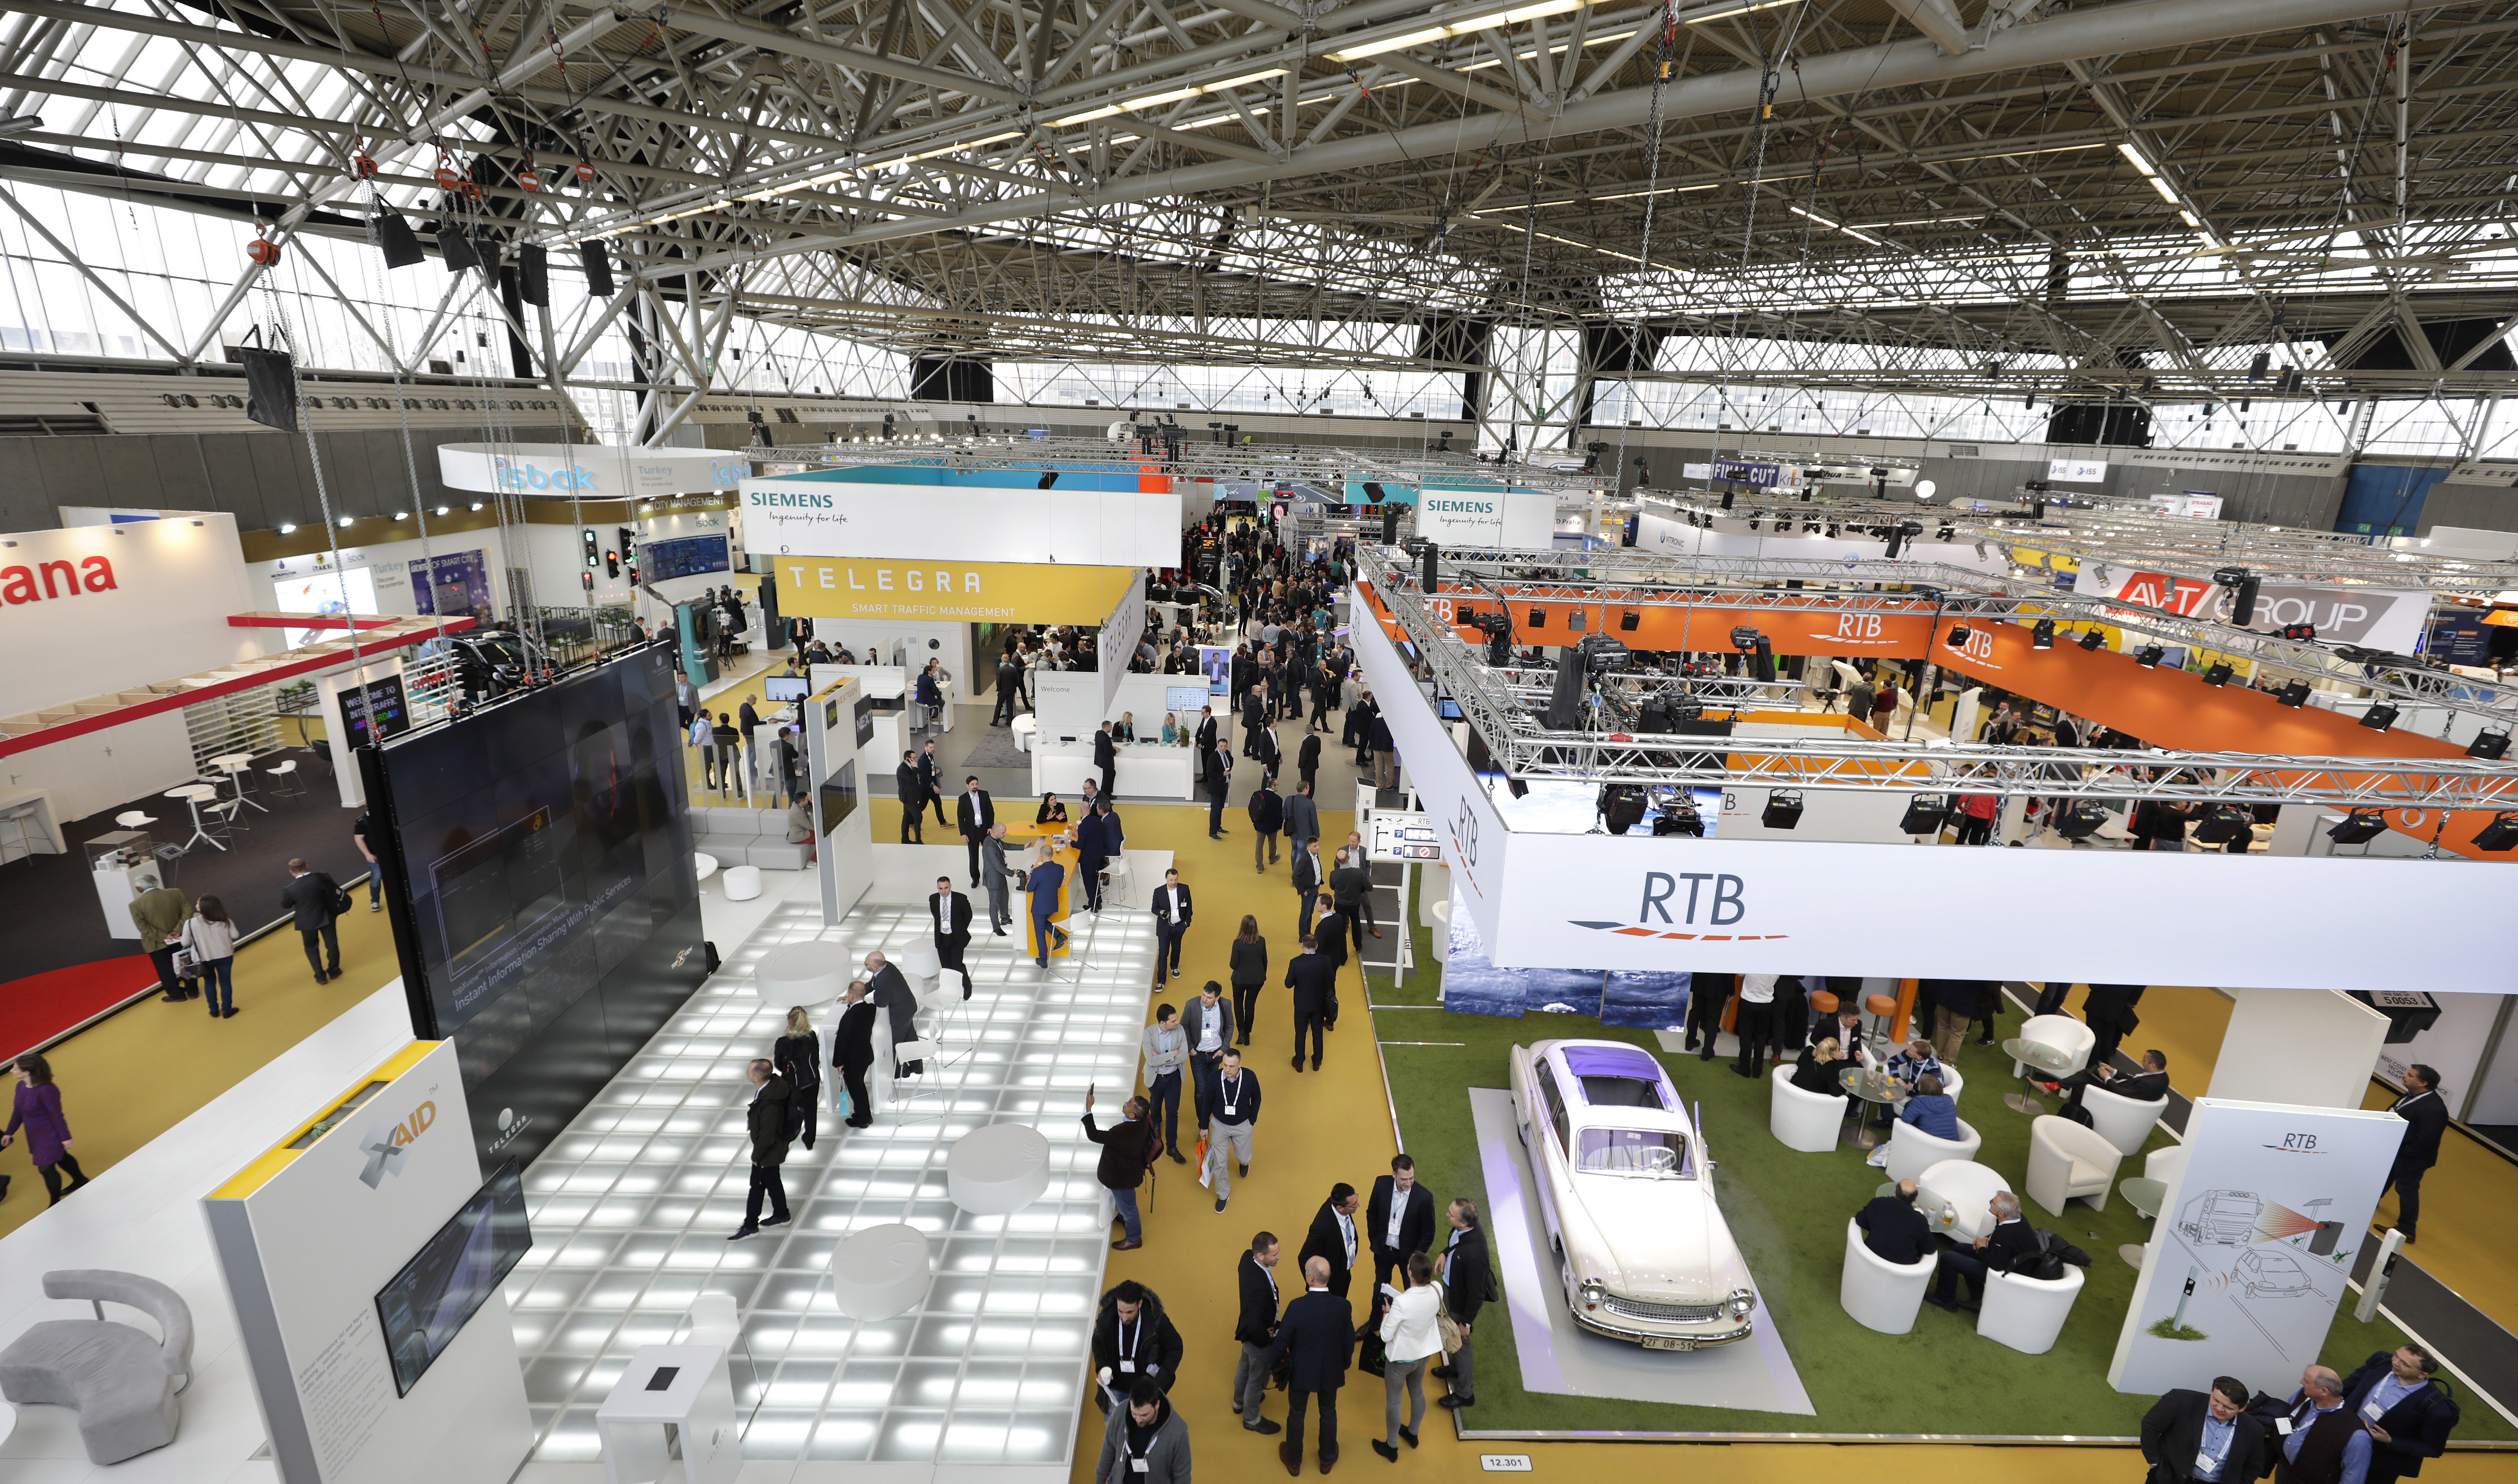 More than 33,000 professionals will convene in Amsterdam at Intertraffic, where the traffic and mobility industry presents and discusses state-of-the-art solutions